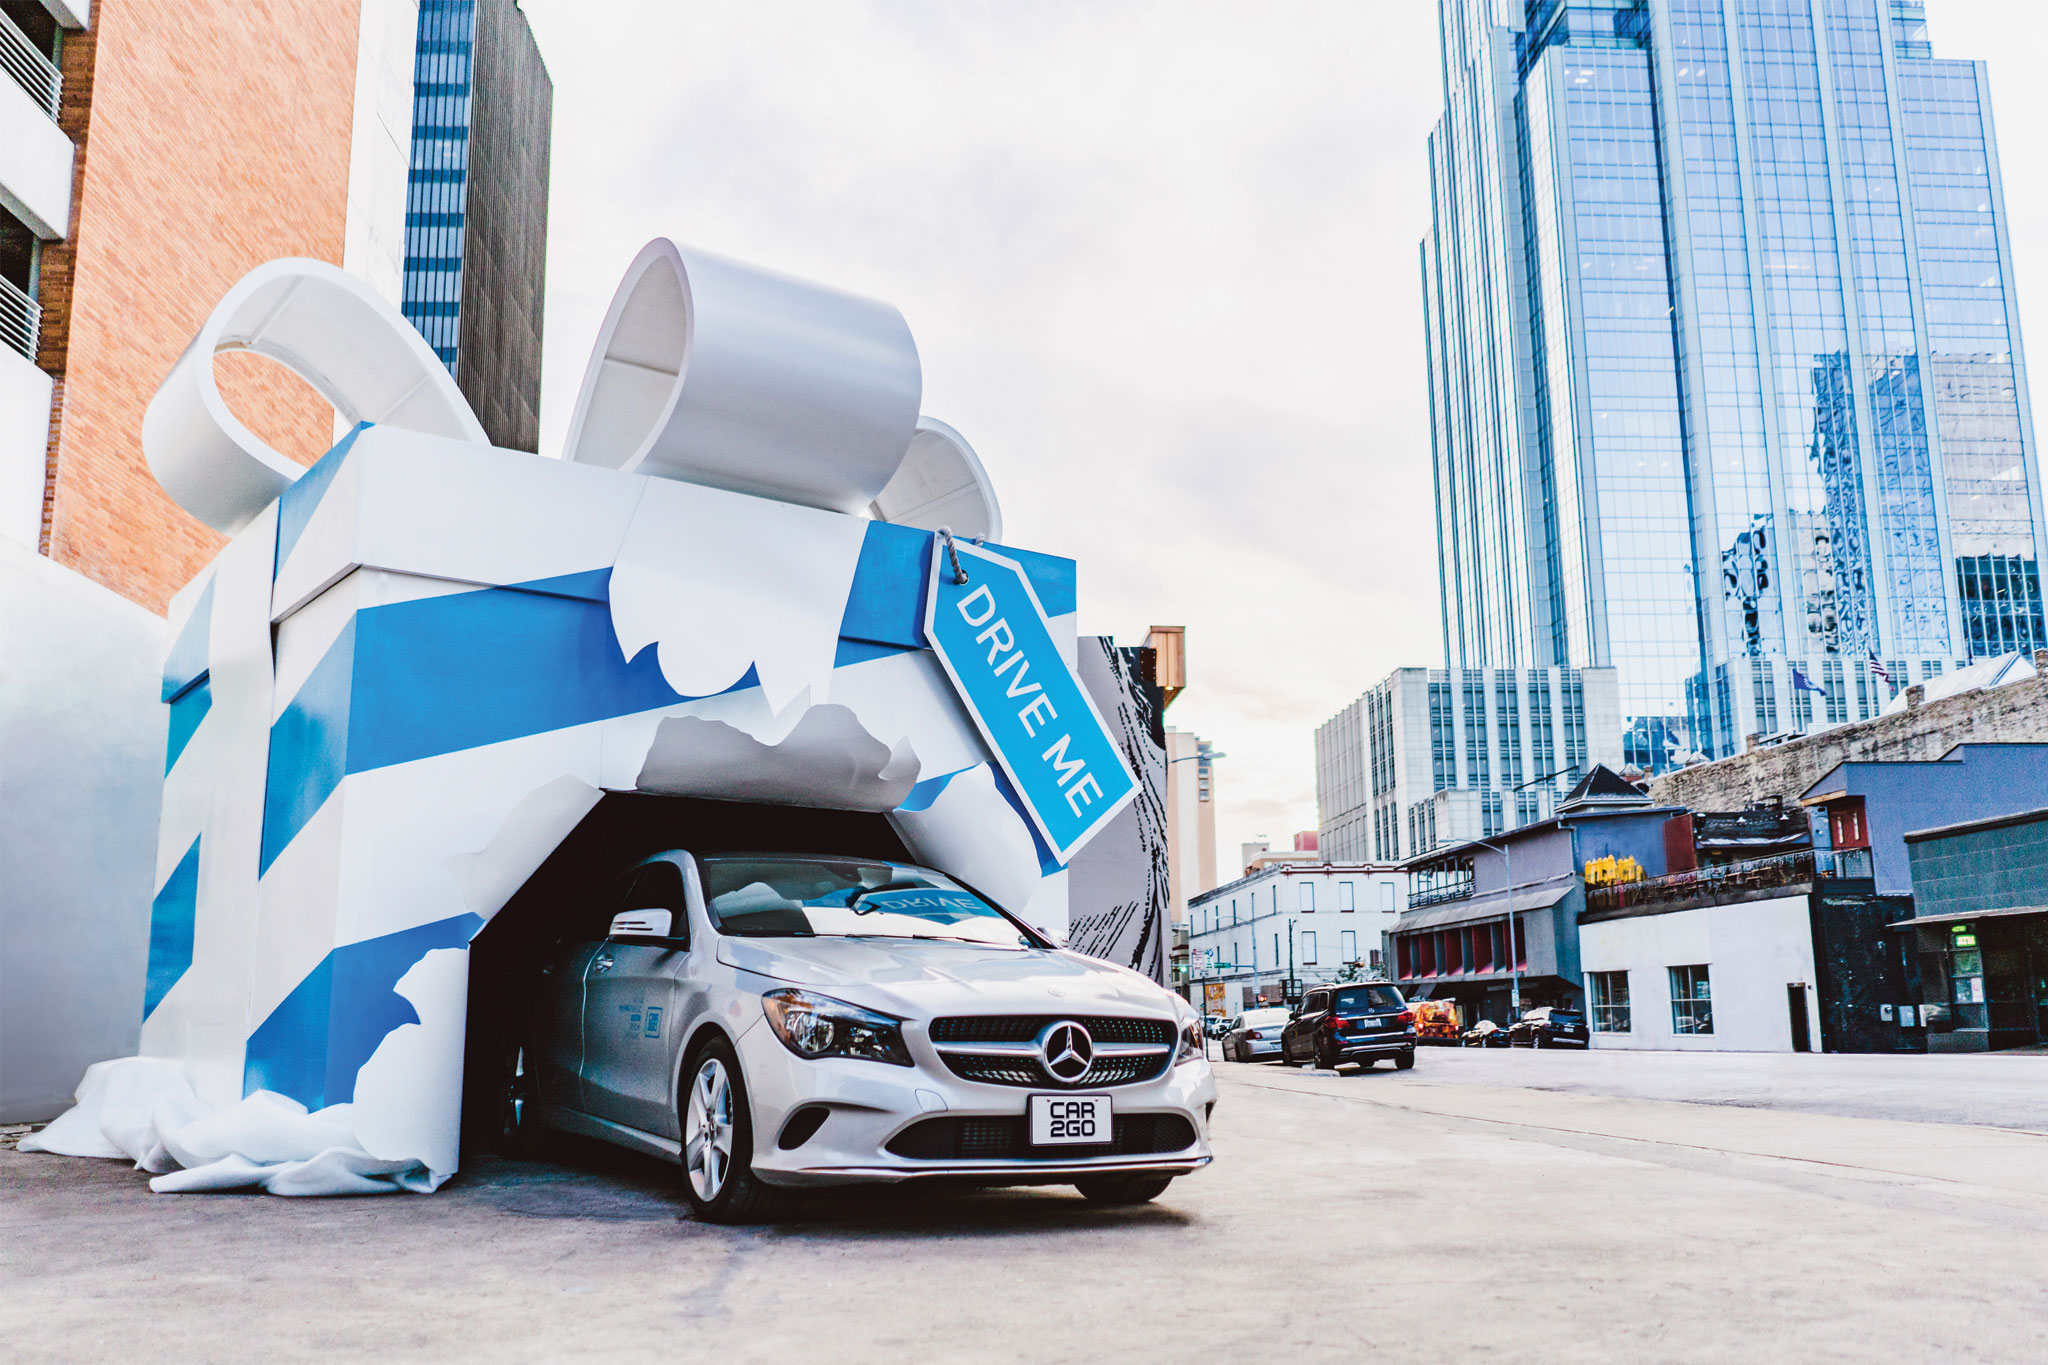 Picture of giant present box sculpture built for Car2Go.